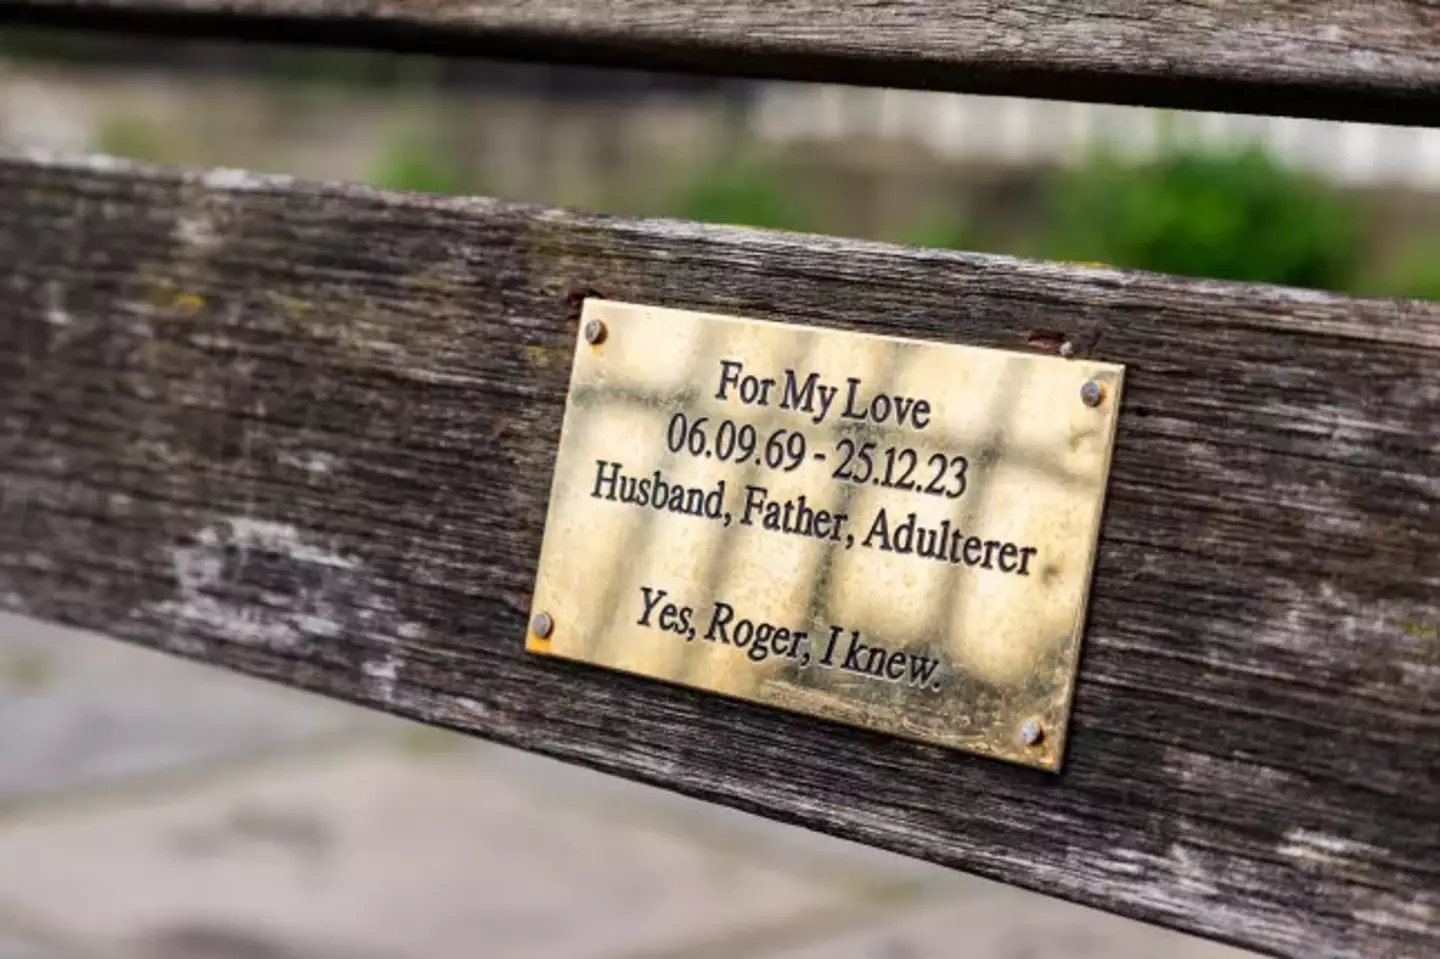 People reckon Banksy might be behind the plaque calling out a cheat named Roger.